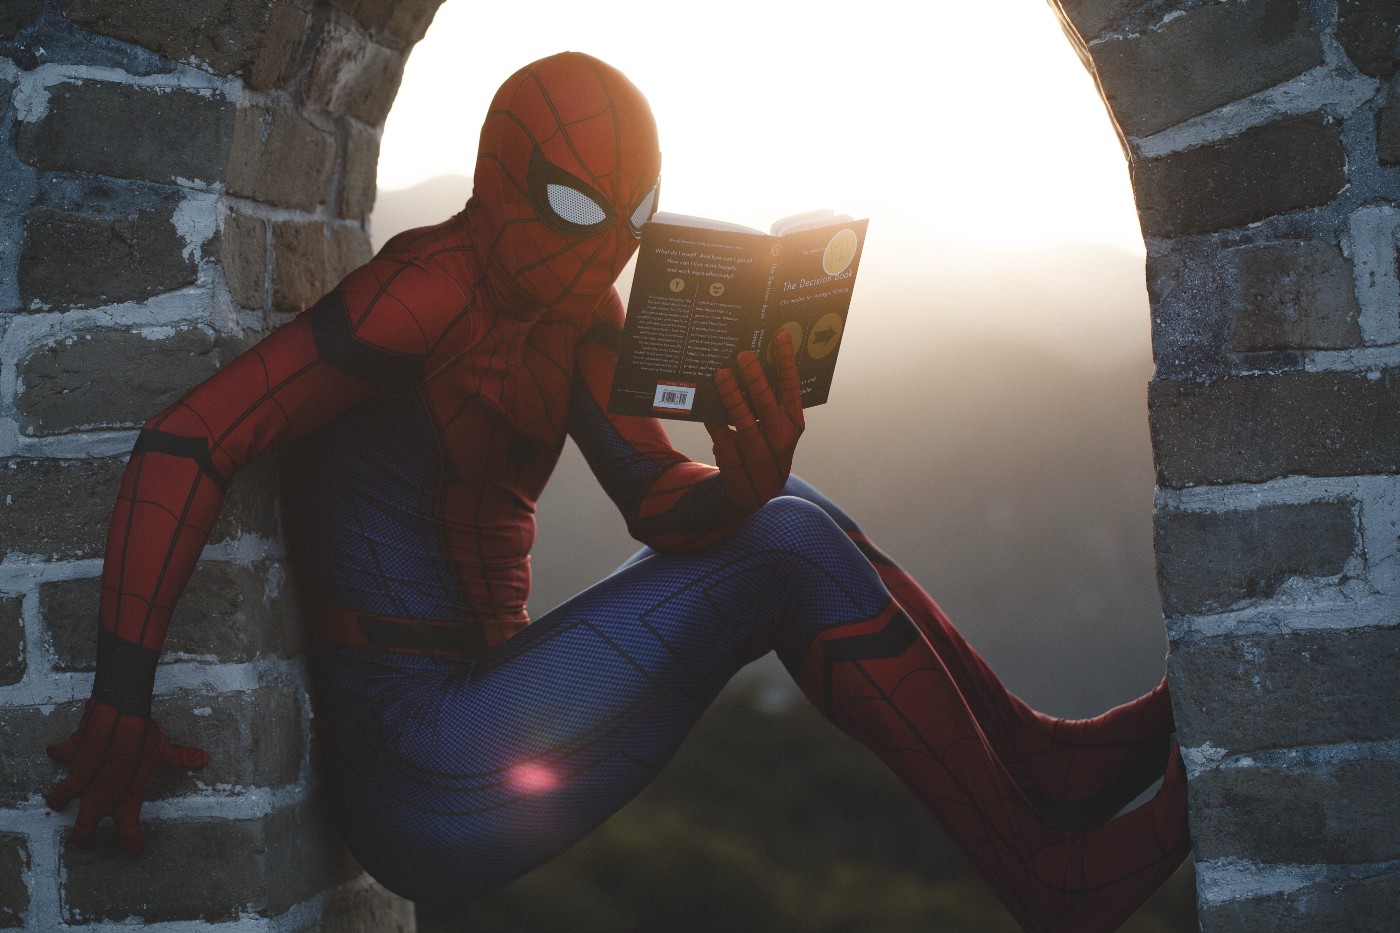 Spiderman reading The Decision Book.